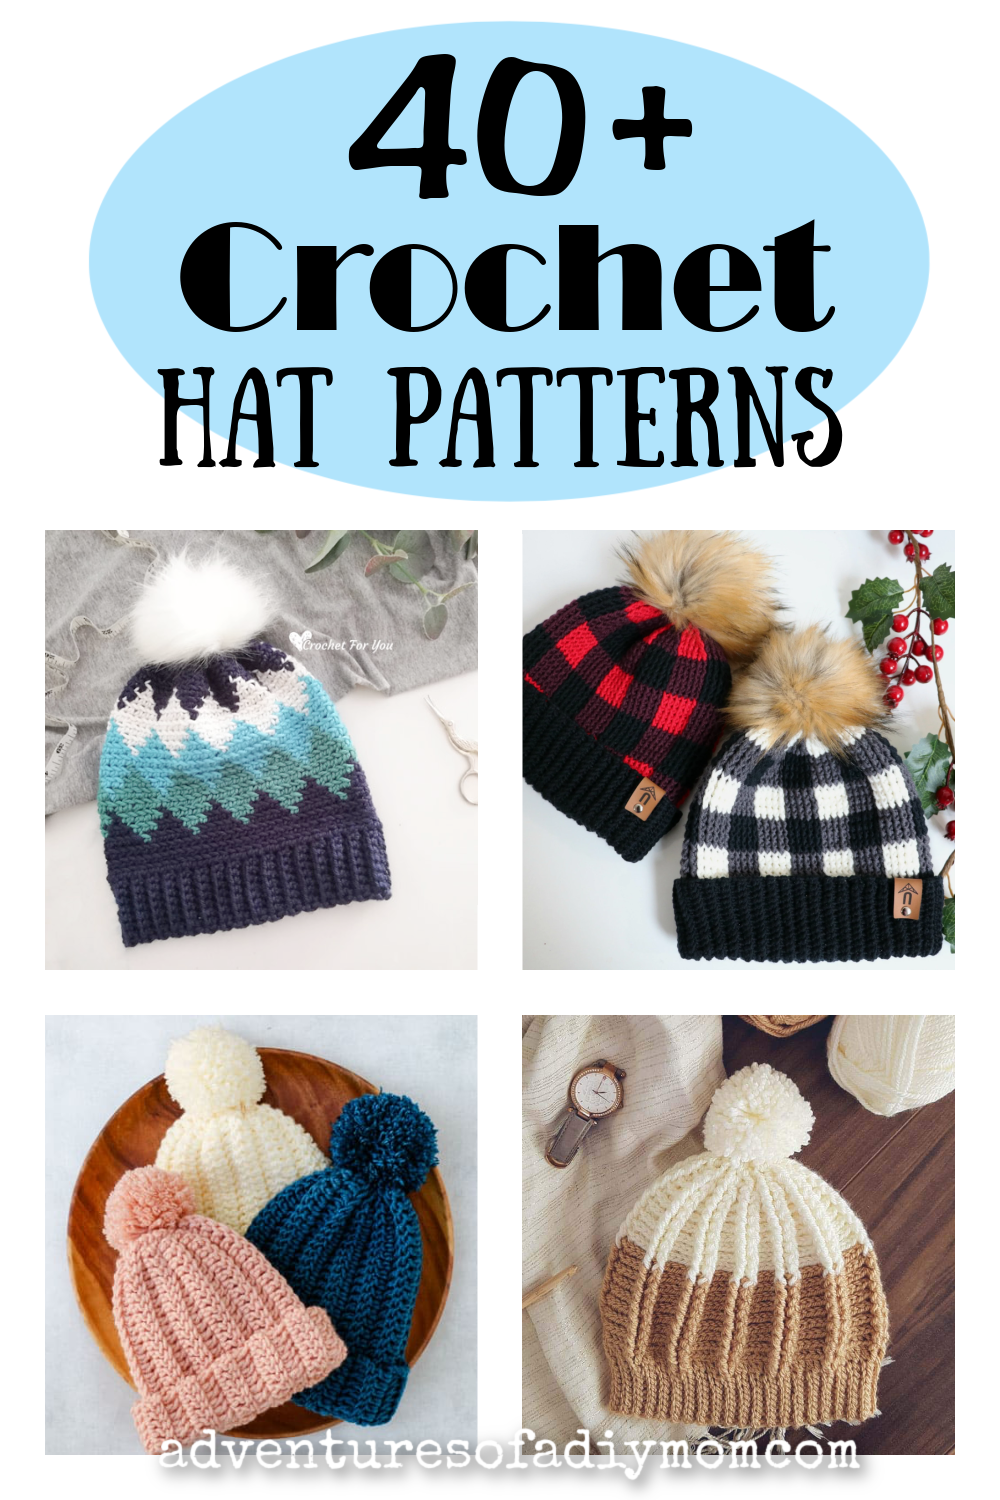 cozy hat crochet pattern Archives - Evelyn And Peter Crochet